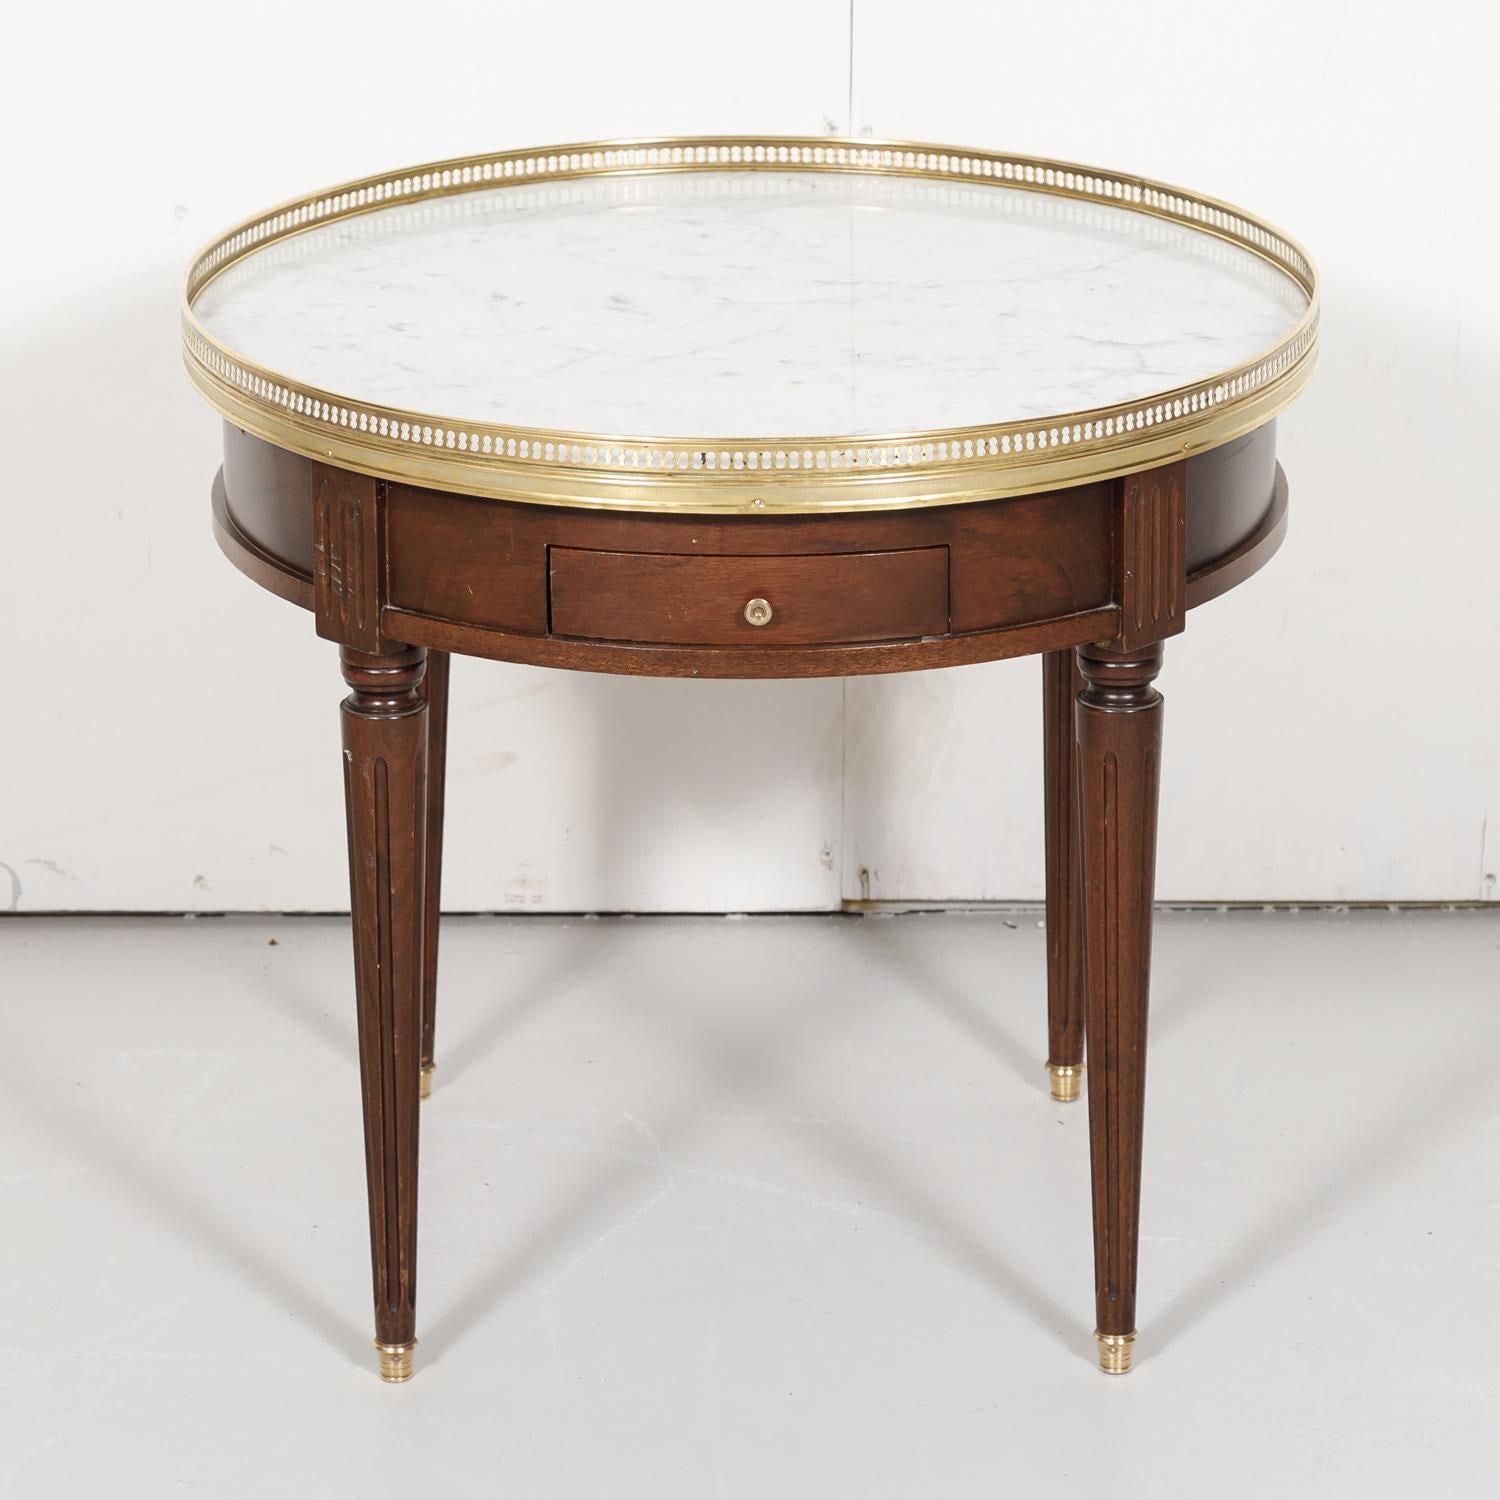 Classic Louis XVI style bouillotte side table in mahogany with a Carrara marble top surrounded by a pierced brass gallery, circa early 1900s. The apron has a drawer for cards and chips and two slides with embossed leather tops that were originally